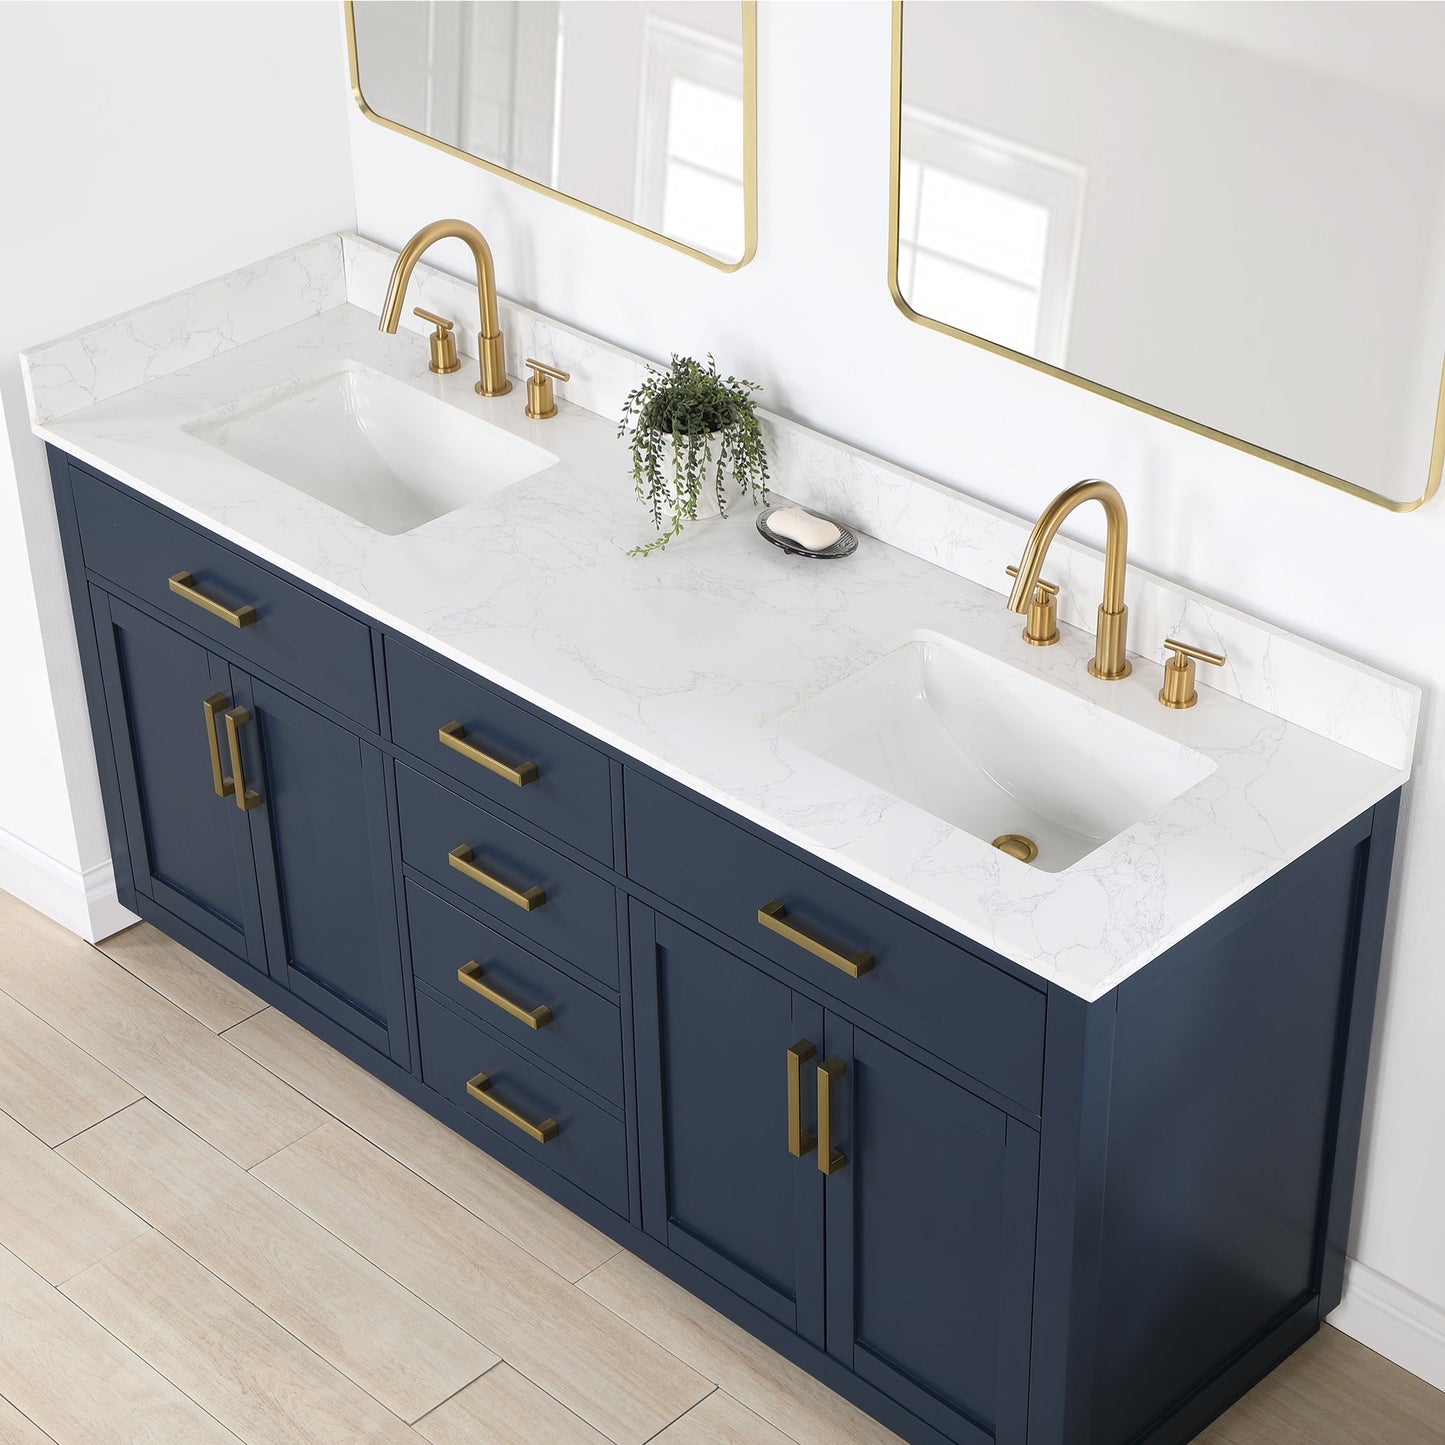 Gavino 72" Double Bathroom Vanity in Royal Blue with Grain White Composite Stone Countertop with Mirror